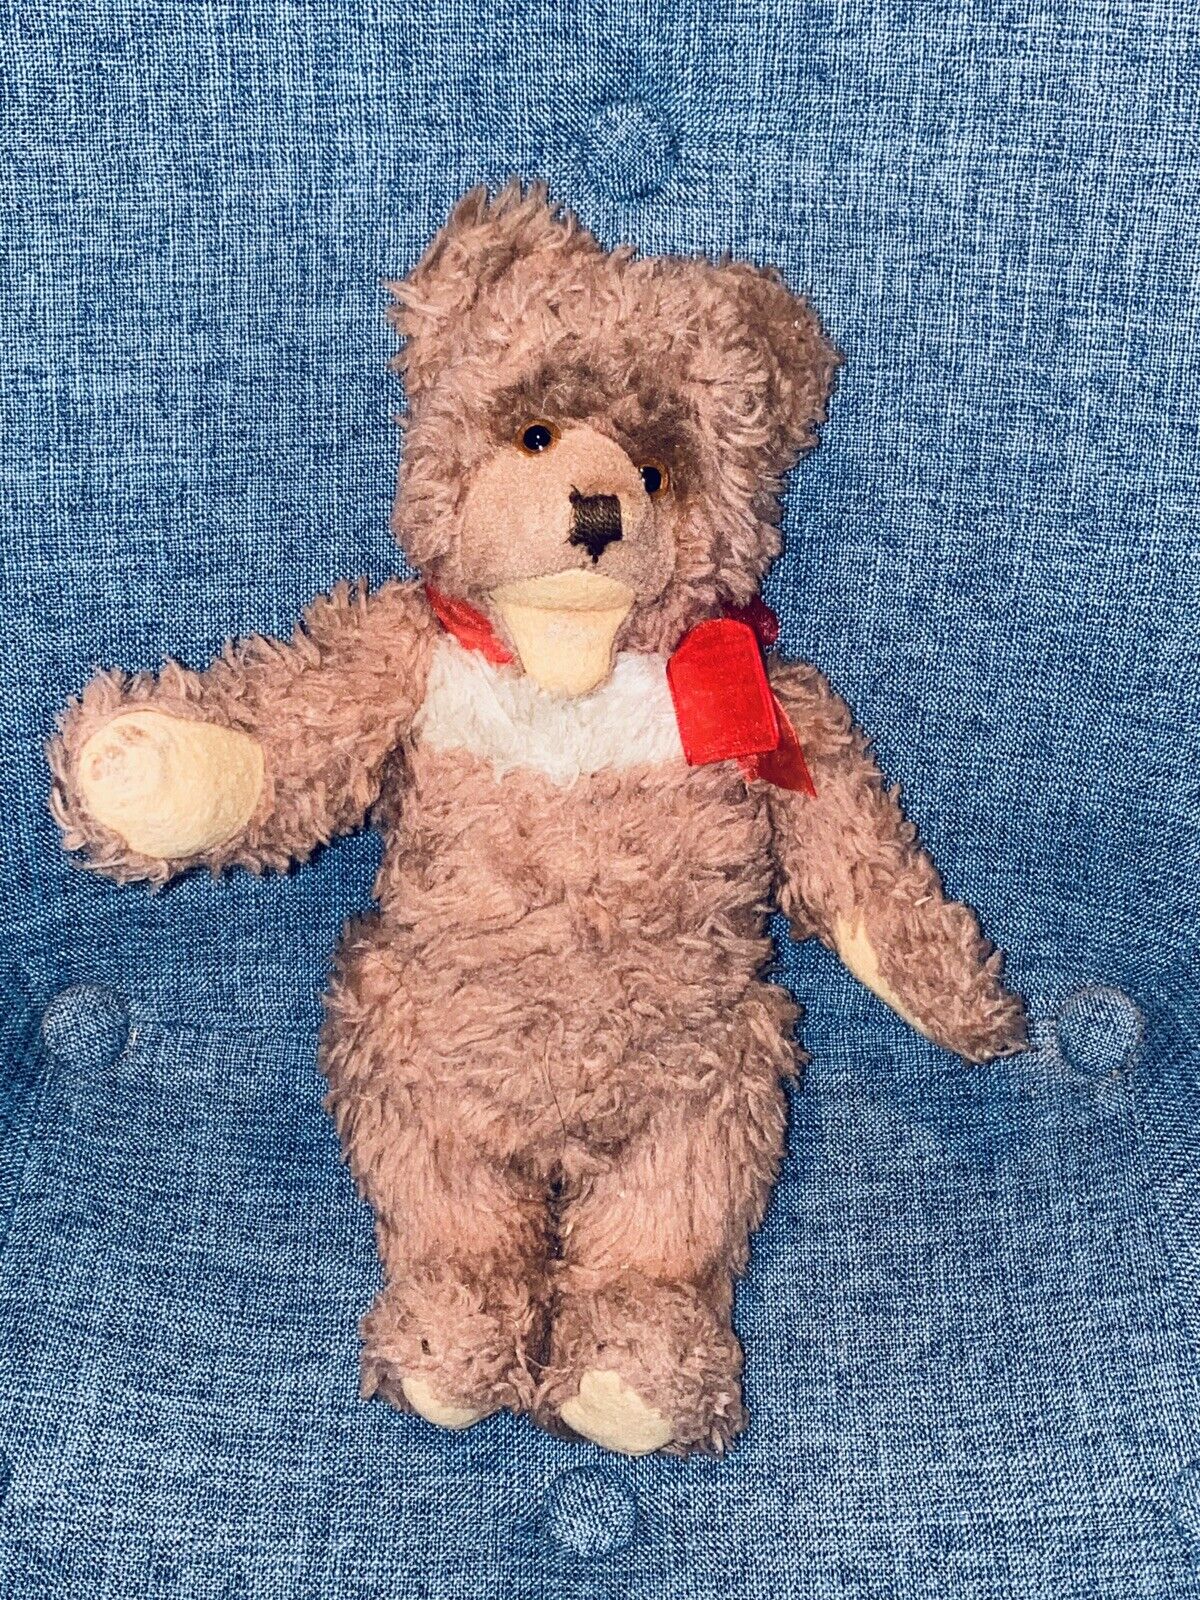 10” STEIFF VINTAGE TEDDY BEAR ANTIQUE DOLL GERMANY RED BOW REALL